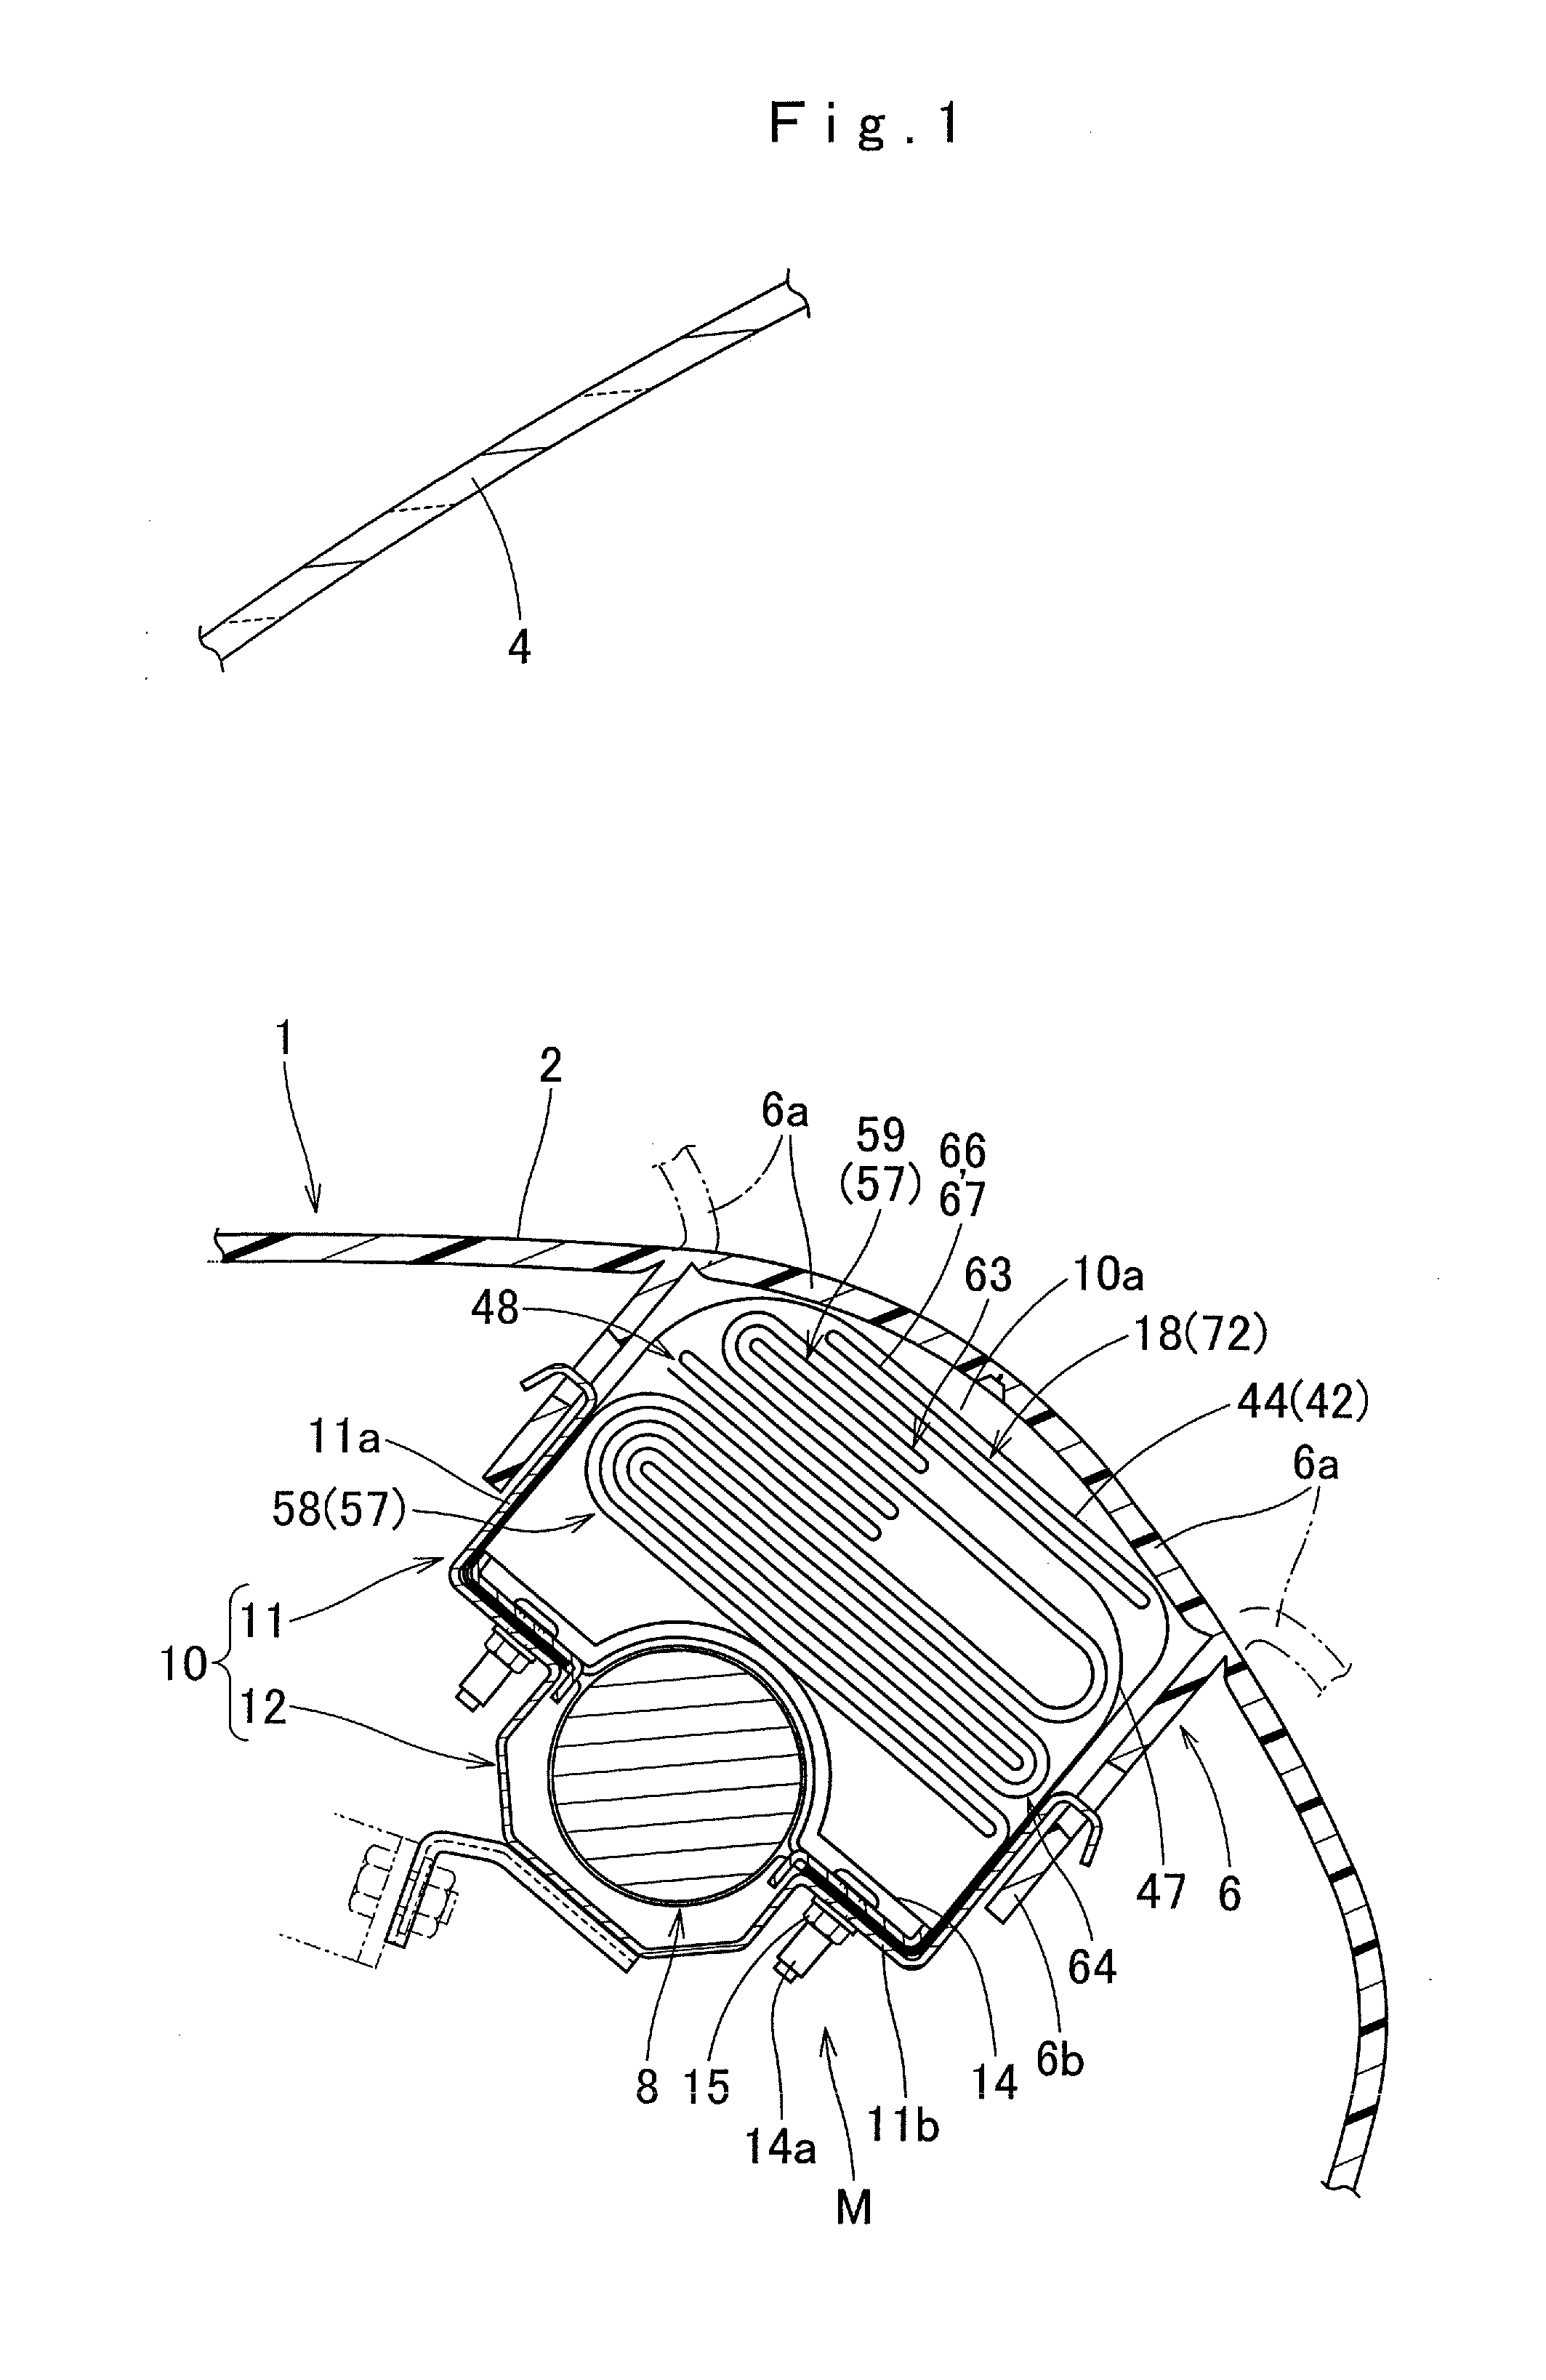 Airbag apparatus for a front passenger's seat